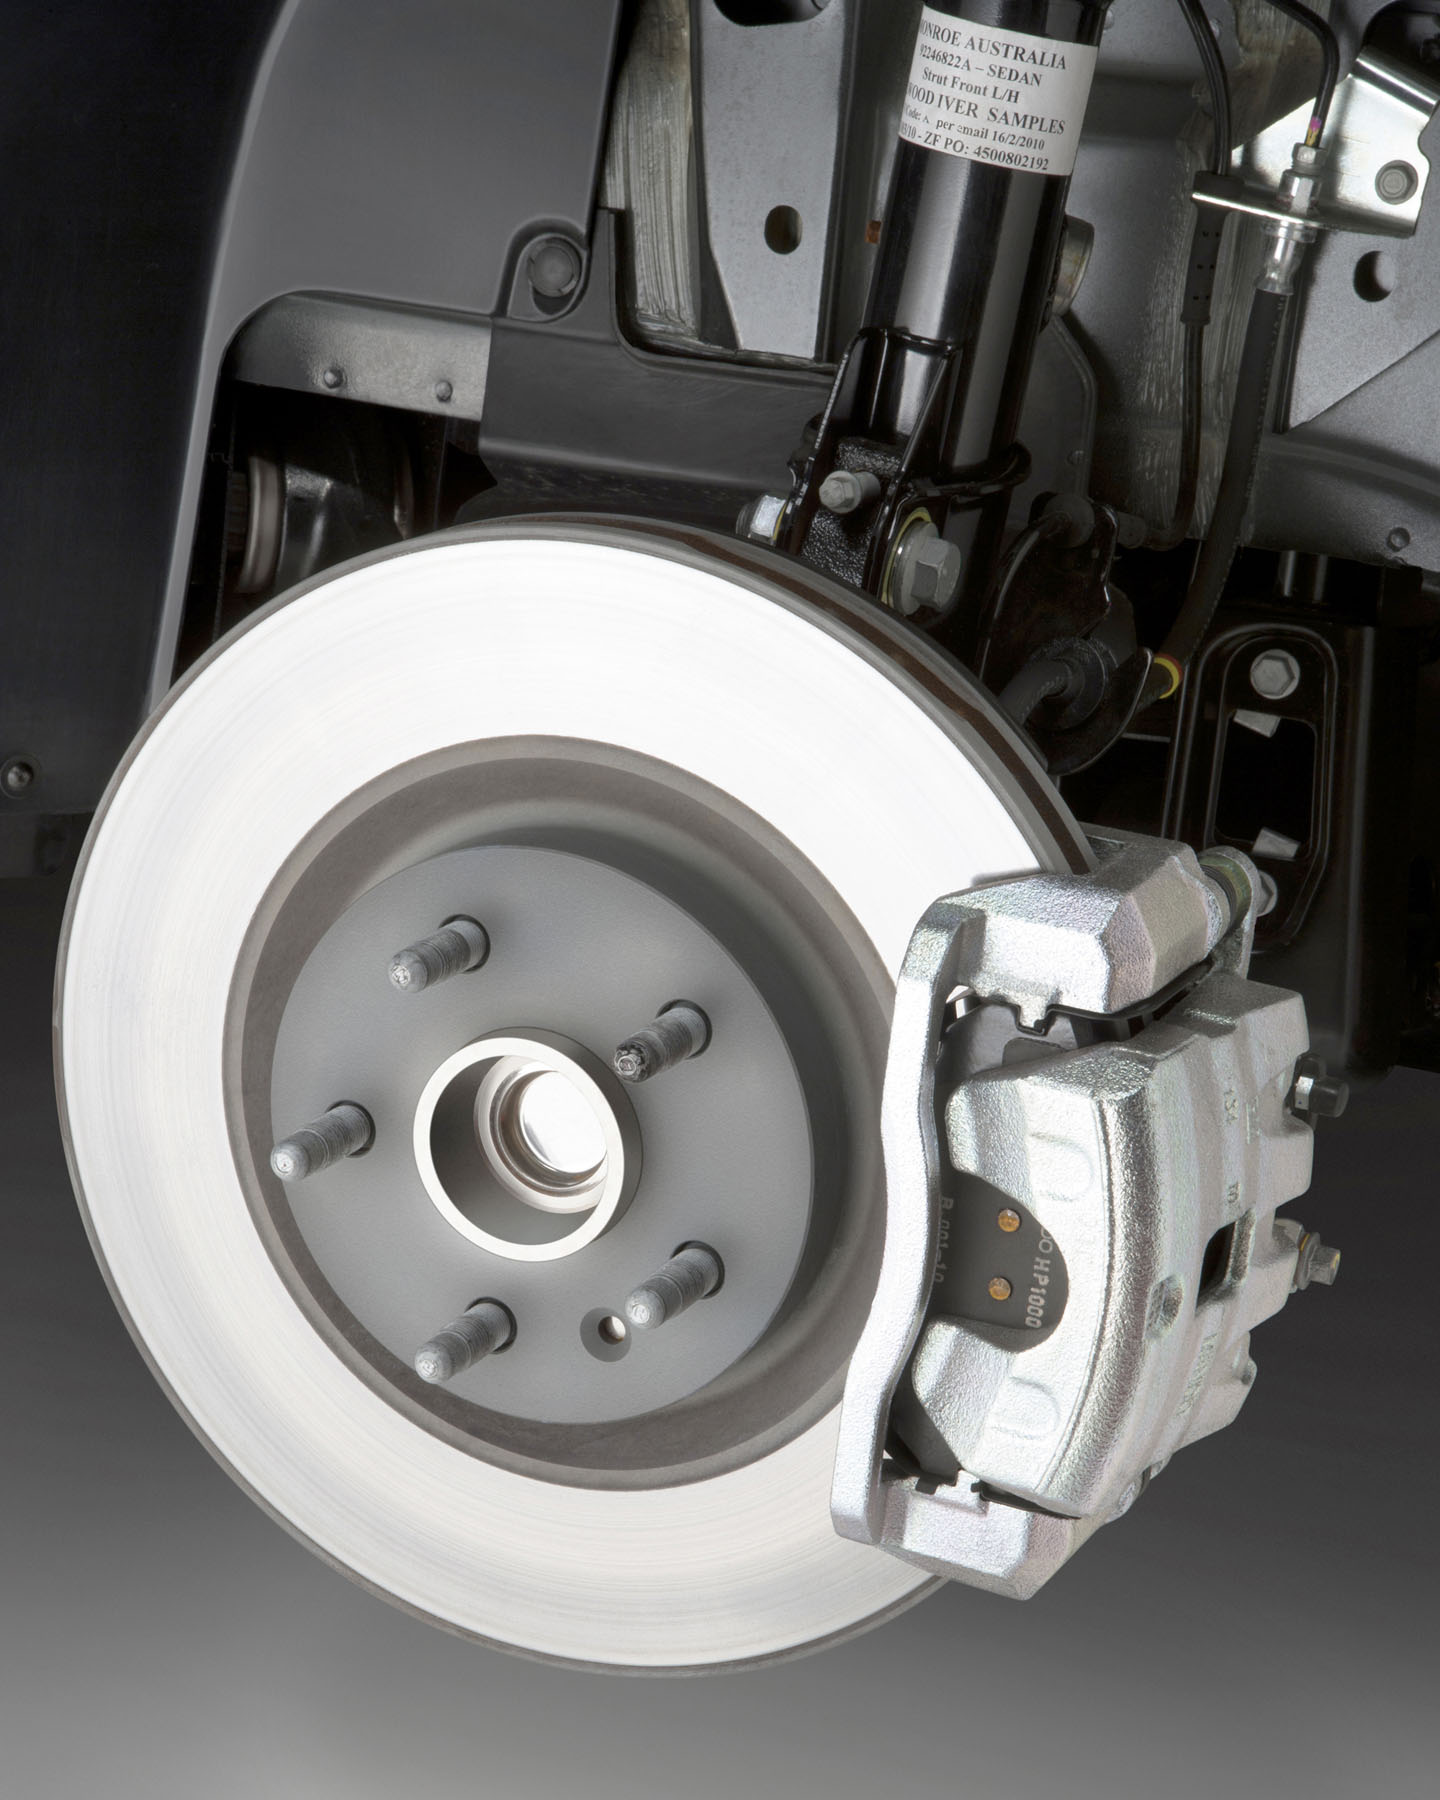 Here’s a disc brake system, naked. The round, shiny bit is the brake disc or rotor. The assembly covering the front of it is the caliper. The pads, which create friction for stopping, are inside, between the body of the caliper and the brake disc. Look closely, and you can see a little bit of text printed on them. See the threaded posts sticking out?  The car’s wheel bolts to those. The wheel and the brake disc spin as you drive, the caliper and pads don’t. In a car with four-wheel disc brakes, there’s a similar setup just behind each of the car’s wheels.